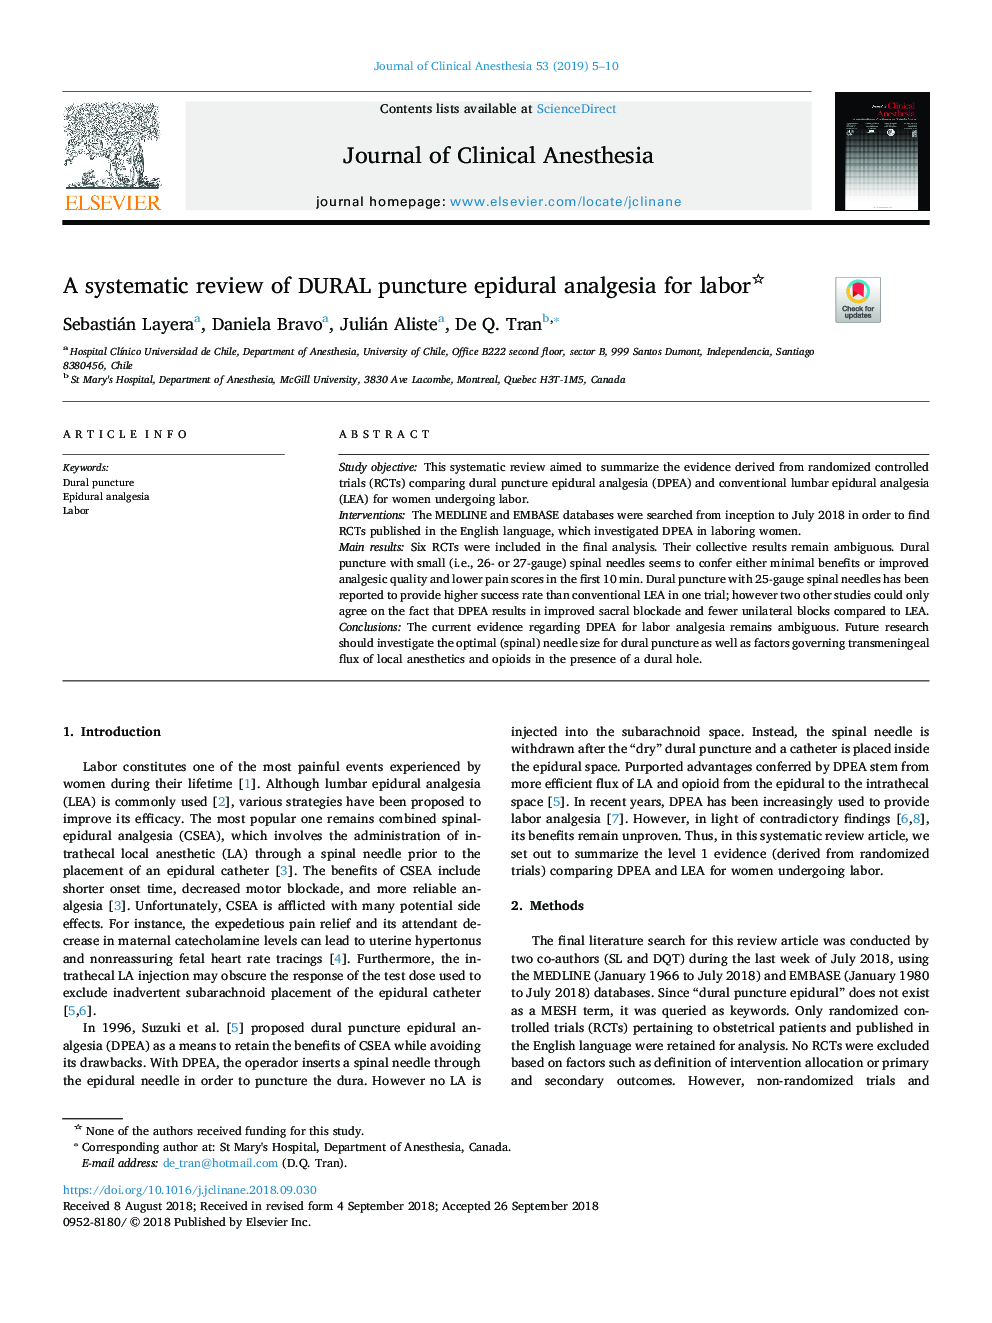 A systematic review of DURAL puncture epidural analgesia for labor